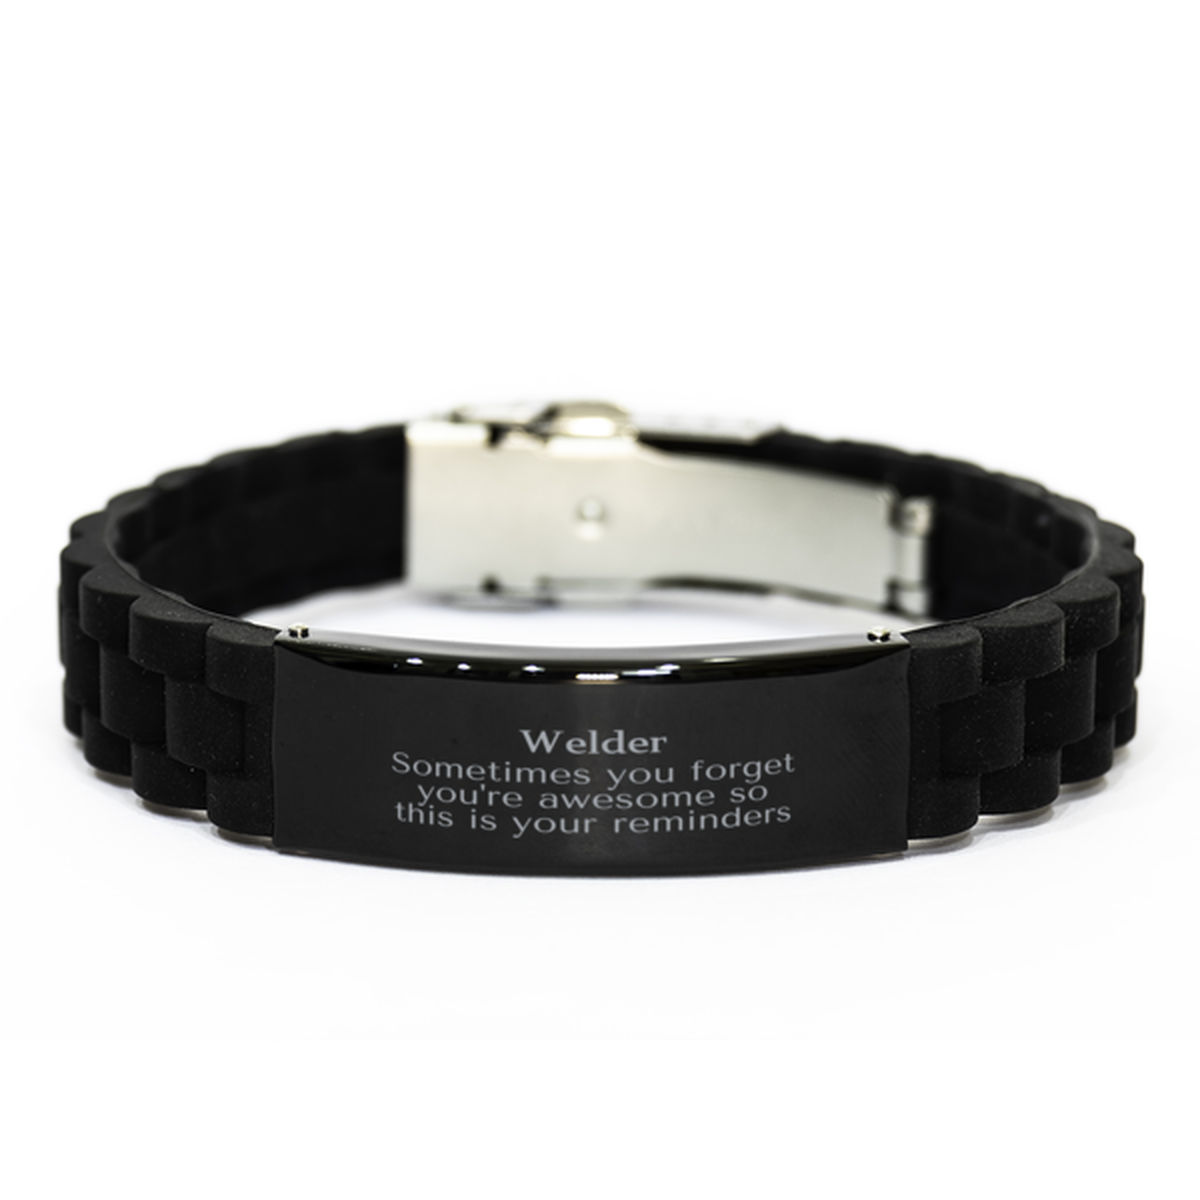 Sentimental Welder Black Glidelock Clasp Bracelet, Welder Sometimes you forget you're awesome so this is your reminders, Graduation Christmas Birthday Gifts for Welder, Men, Women, Coworkers